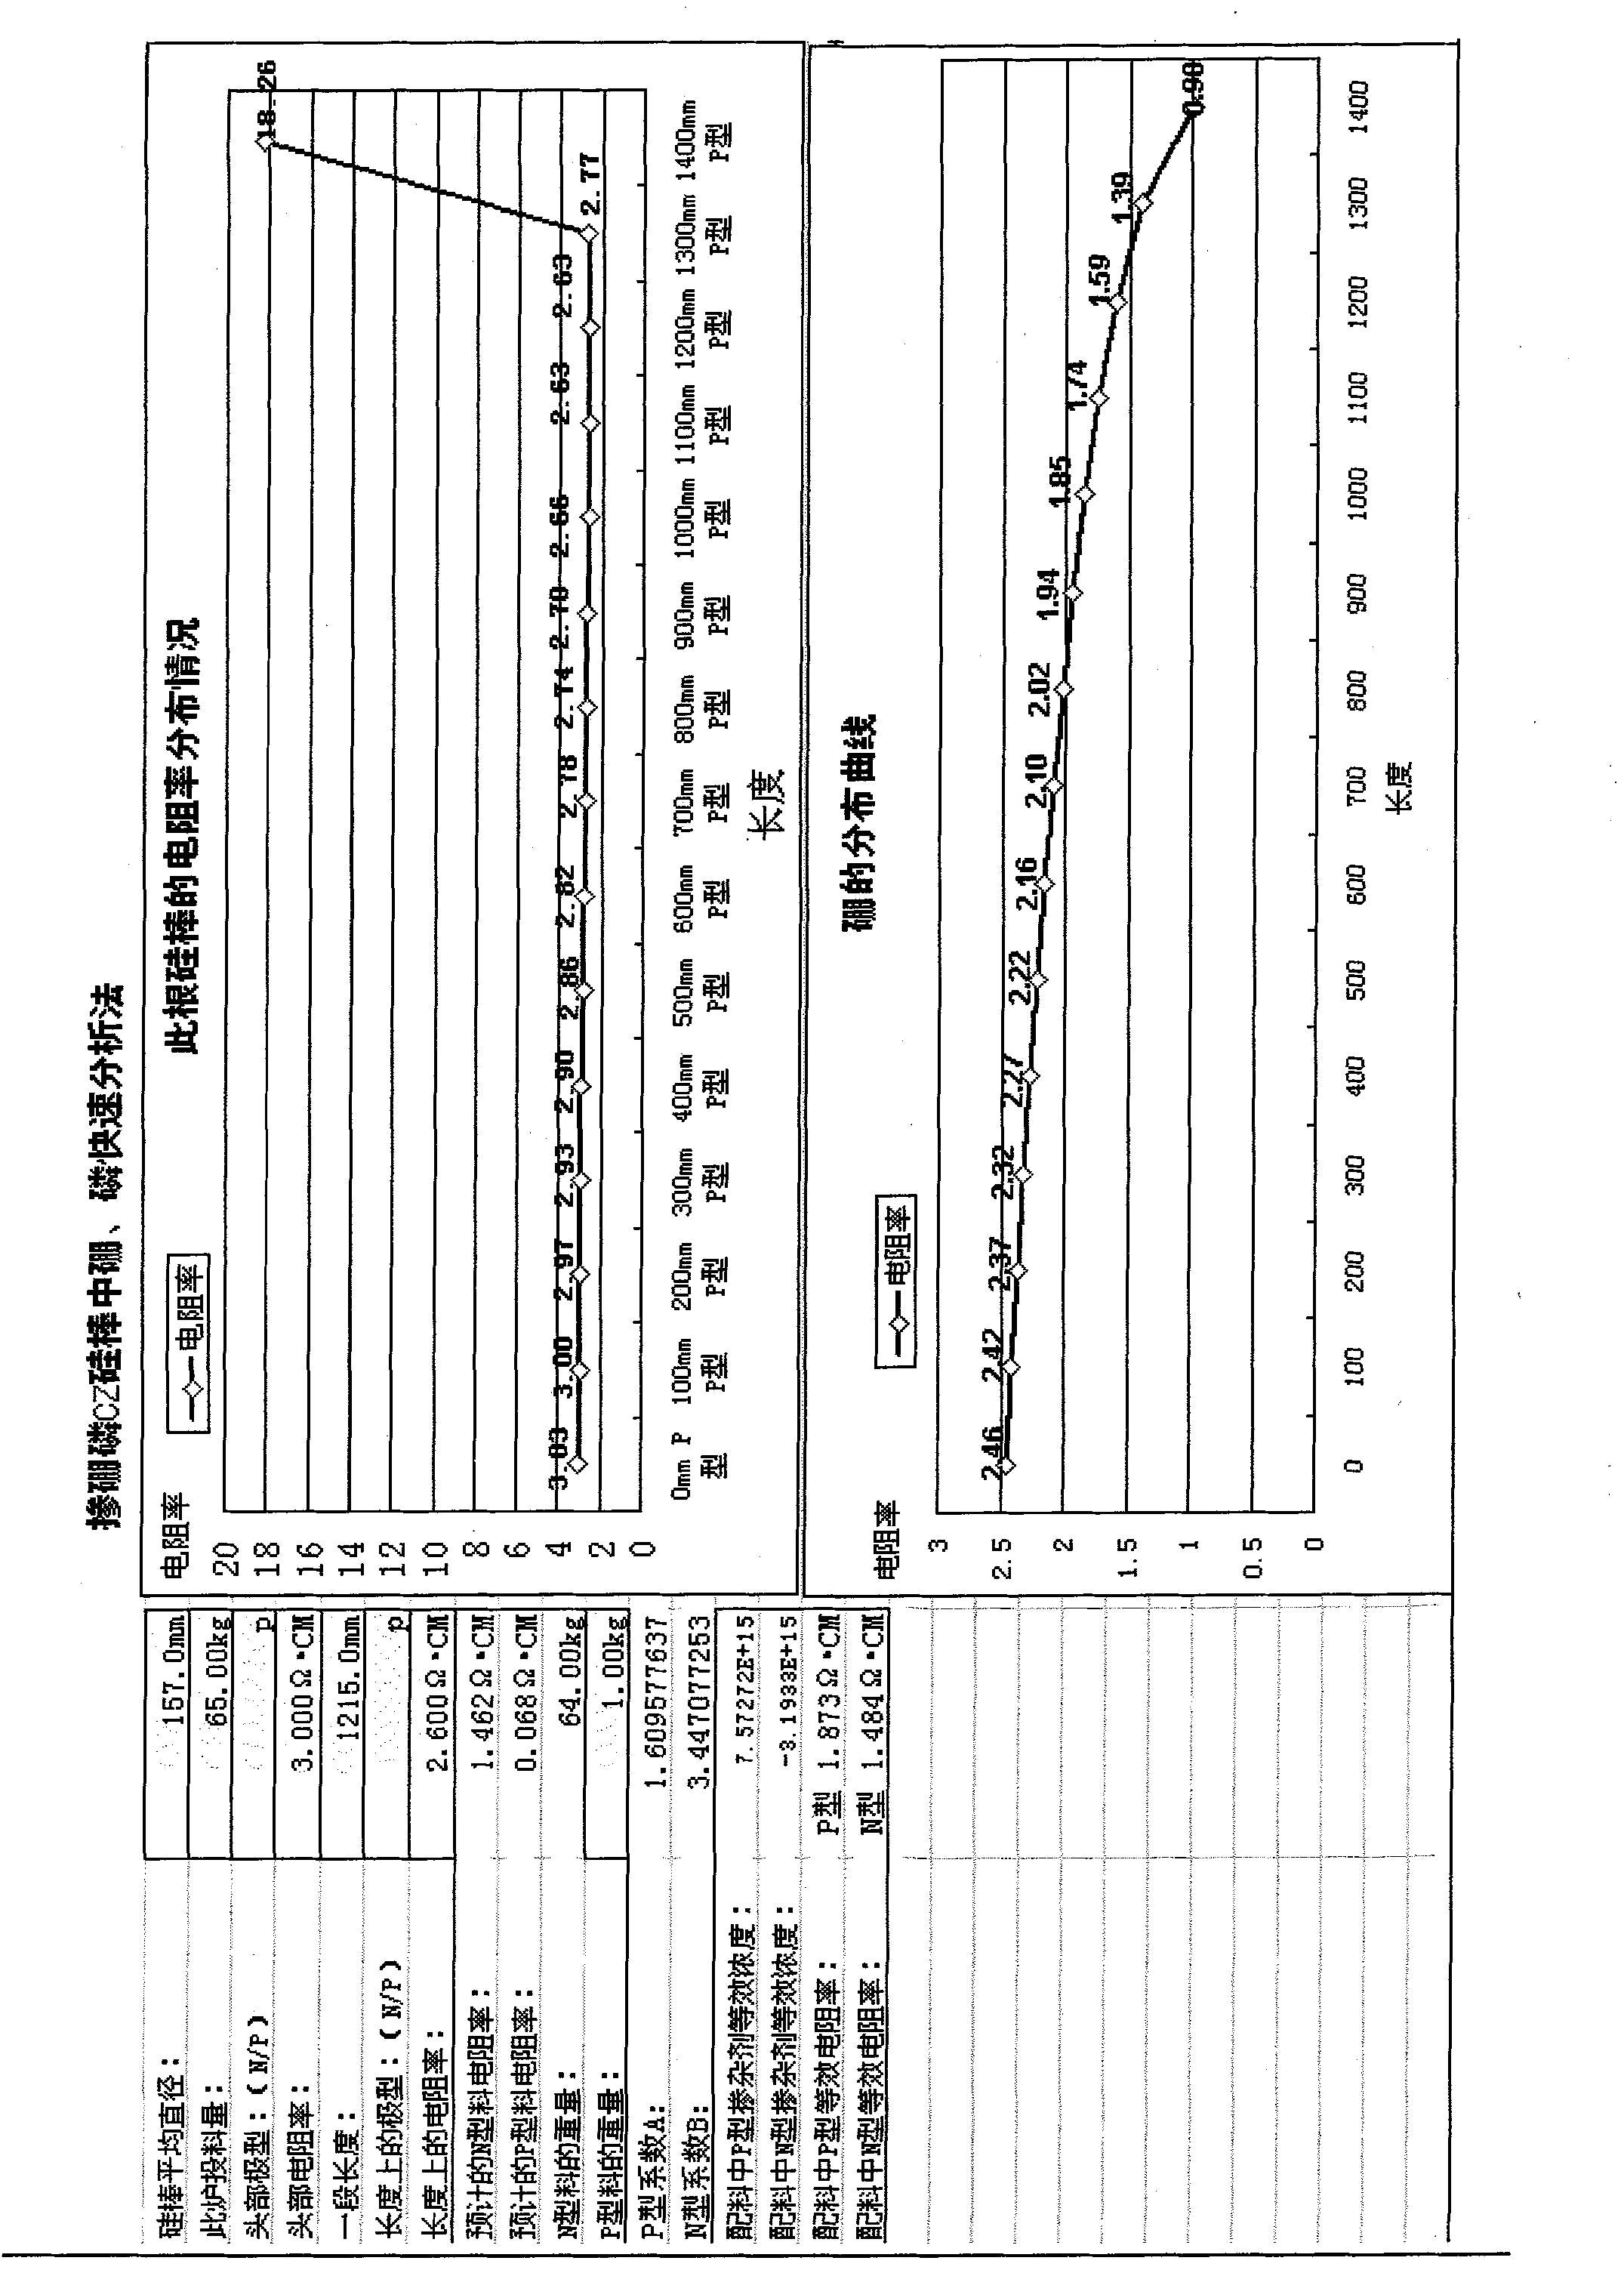 CZ (Czochralski) silicon rod doped with boron and phosphorus, and method for rapidly analyzing contents of boron and phosphorus in ingredients